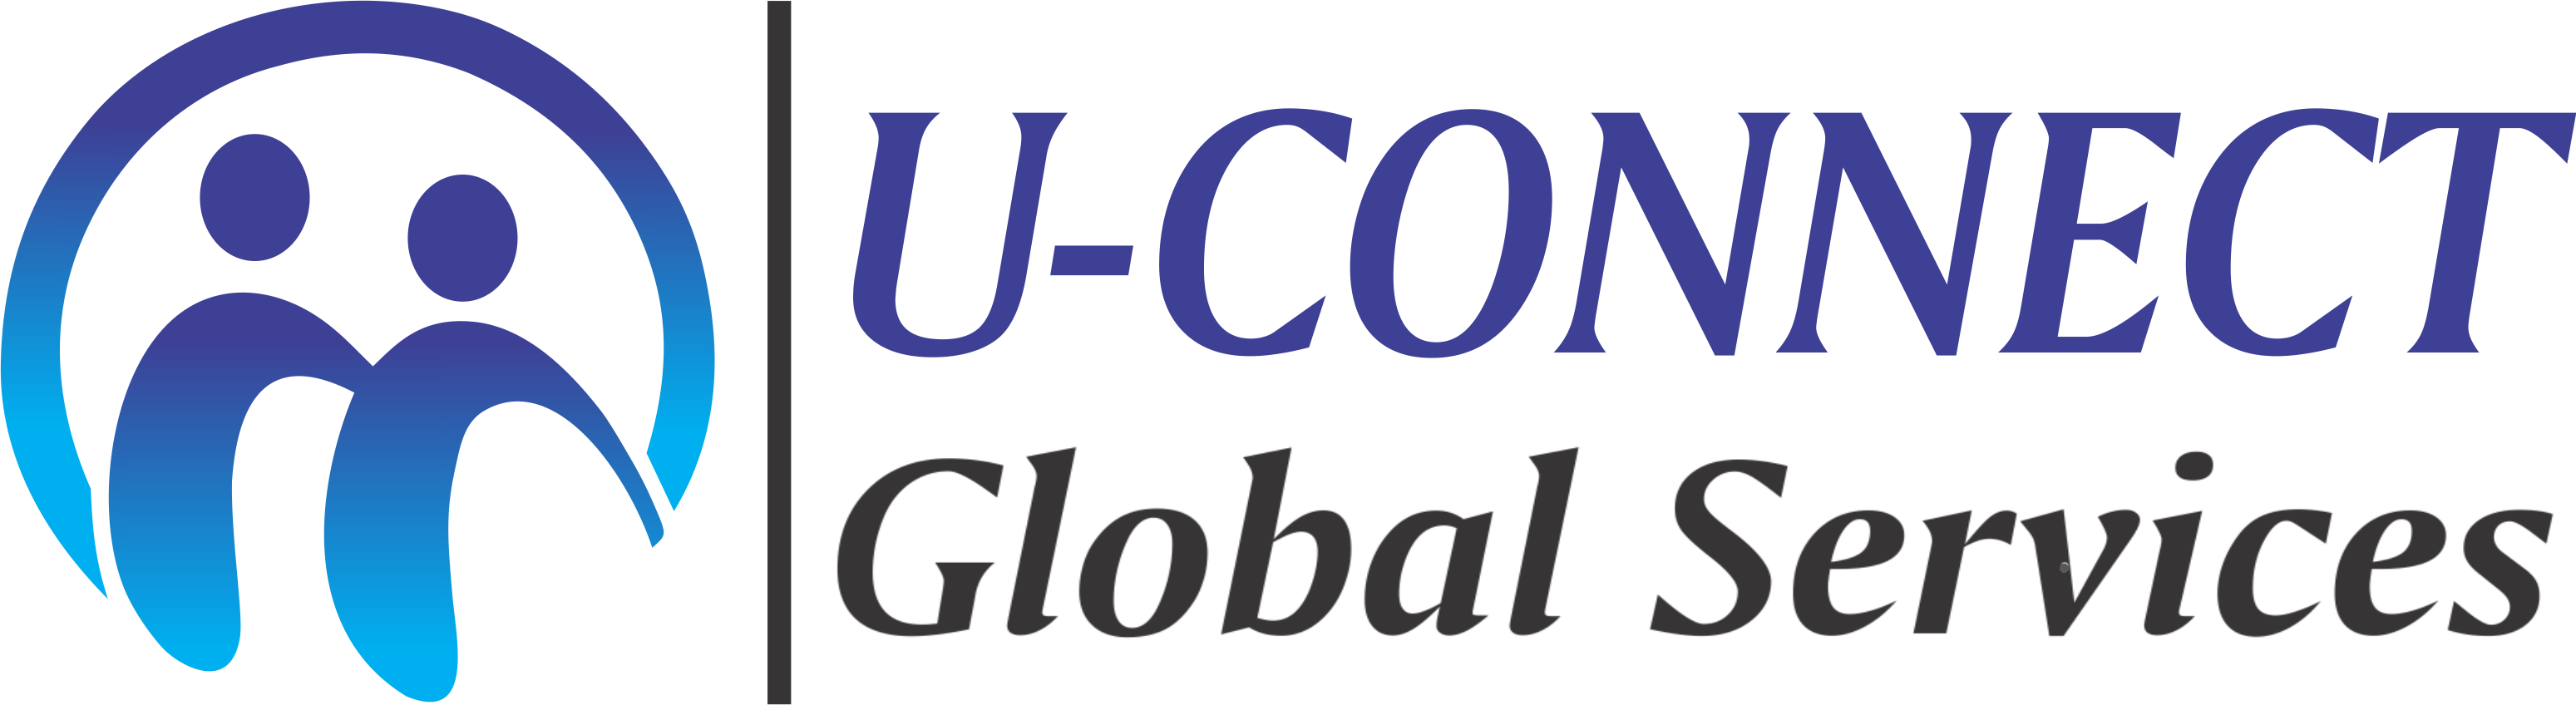 Record Retrieval Services – U-Connect Global Services